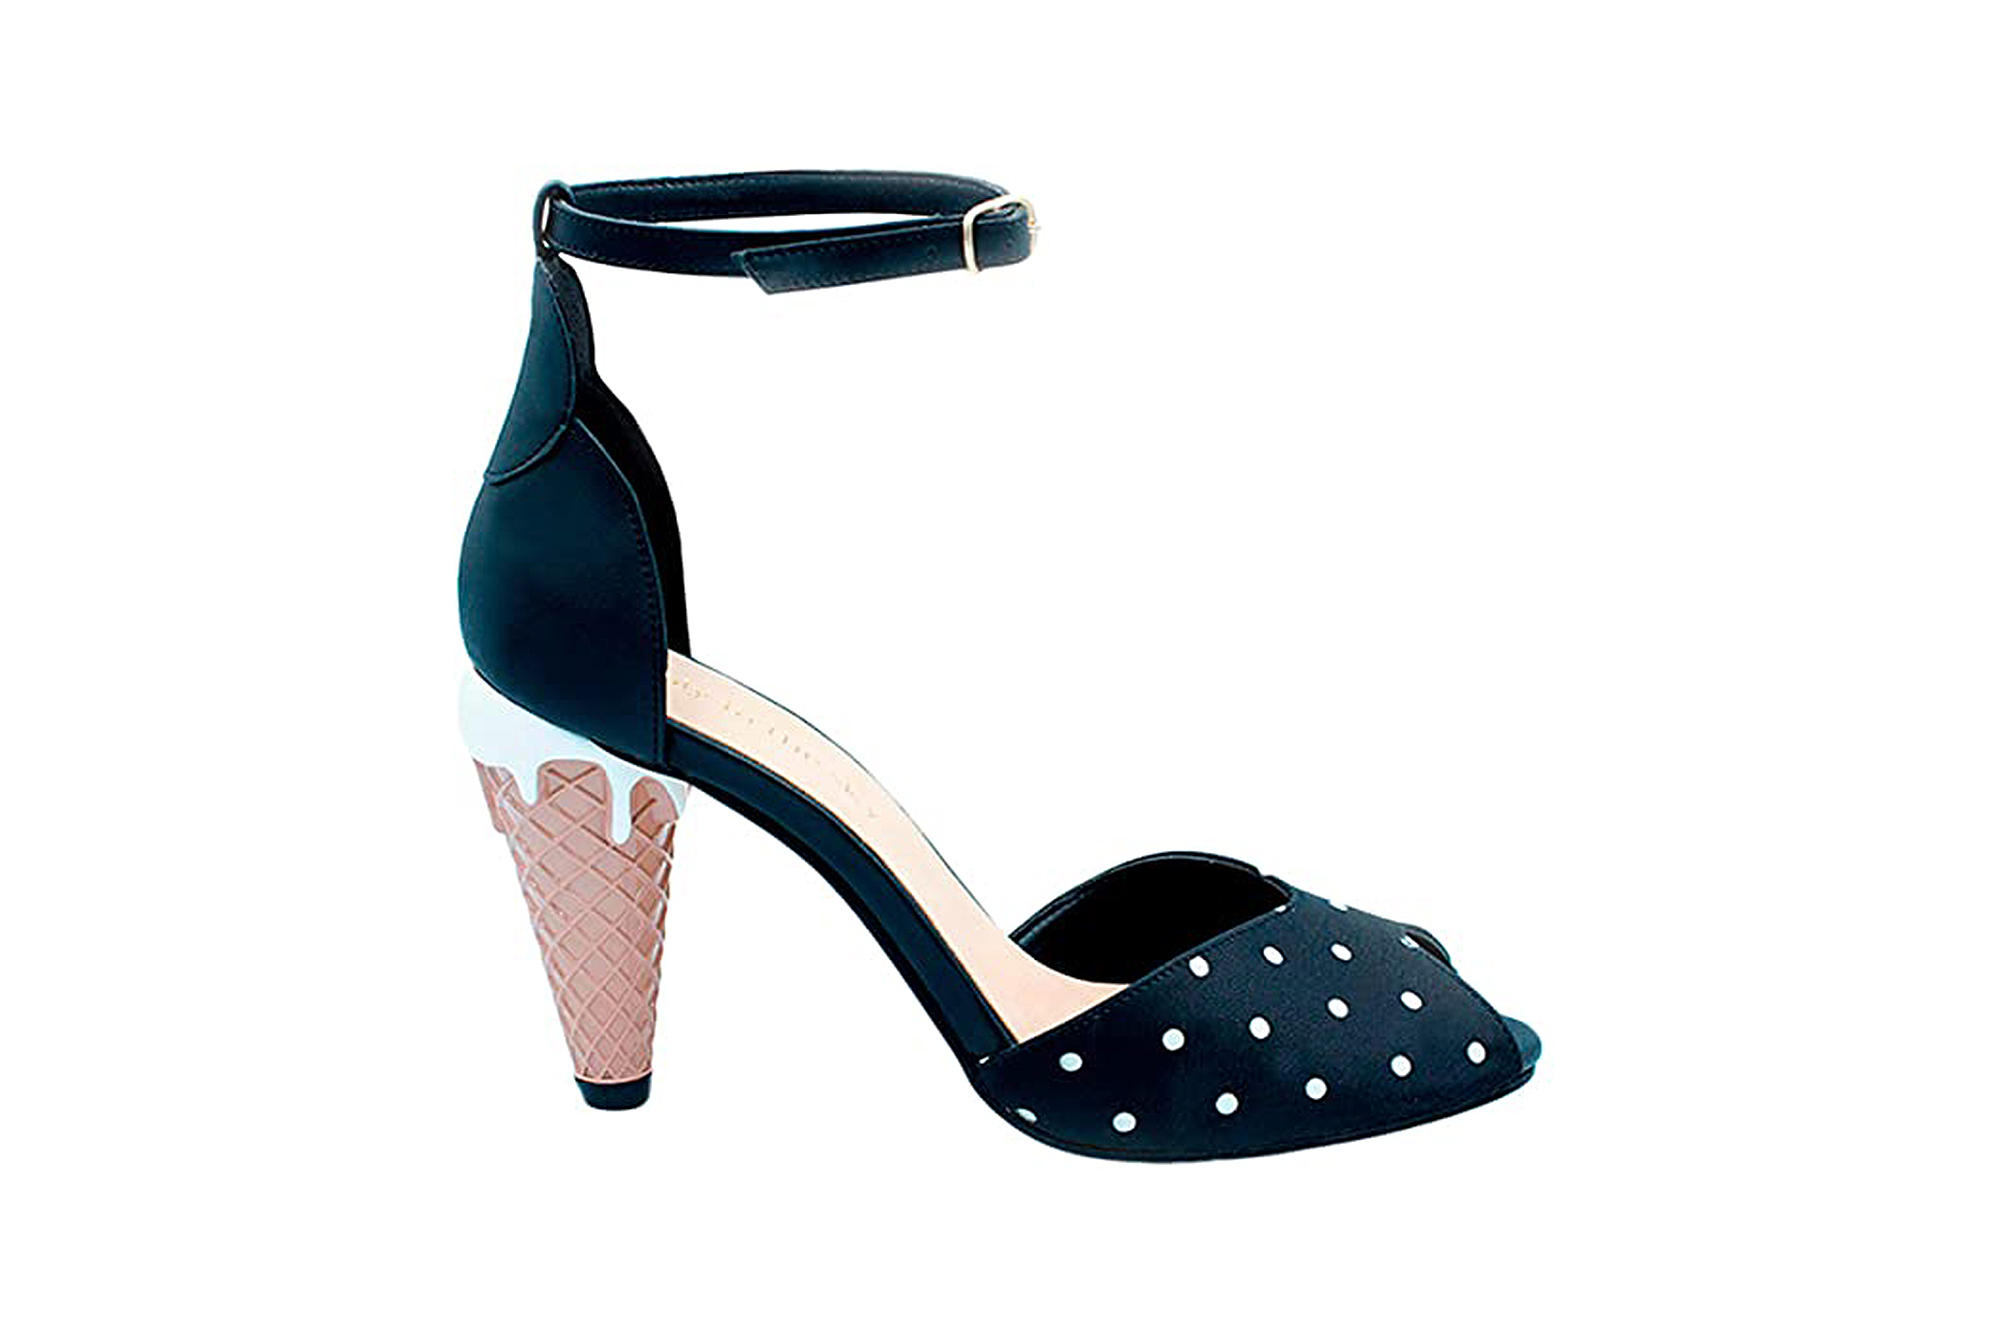 Loly in the Sky Navy Blue Pumps Have the Perfect Fun Touch